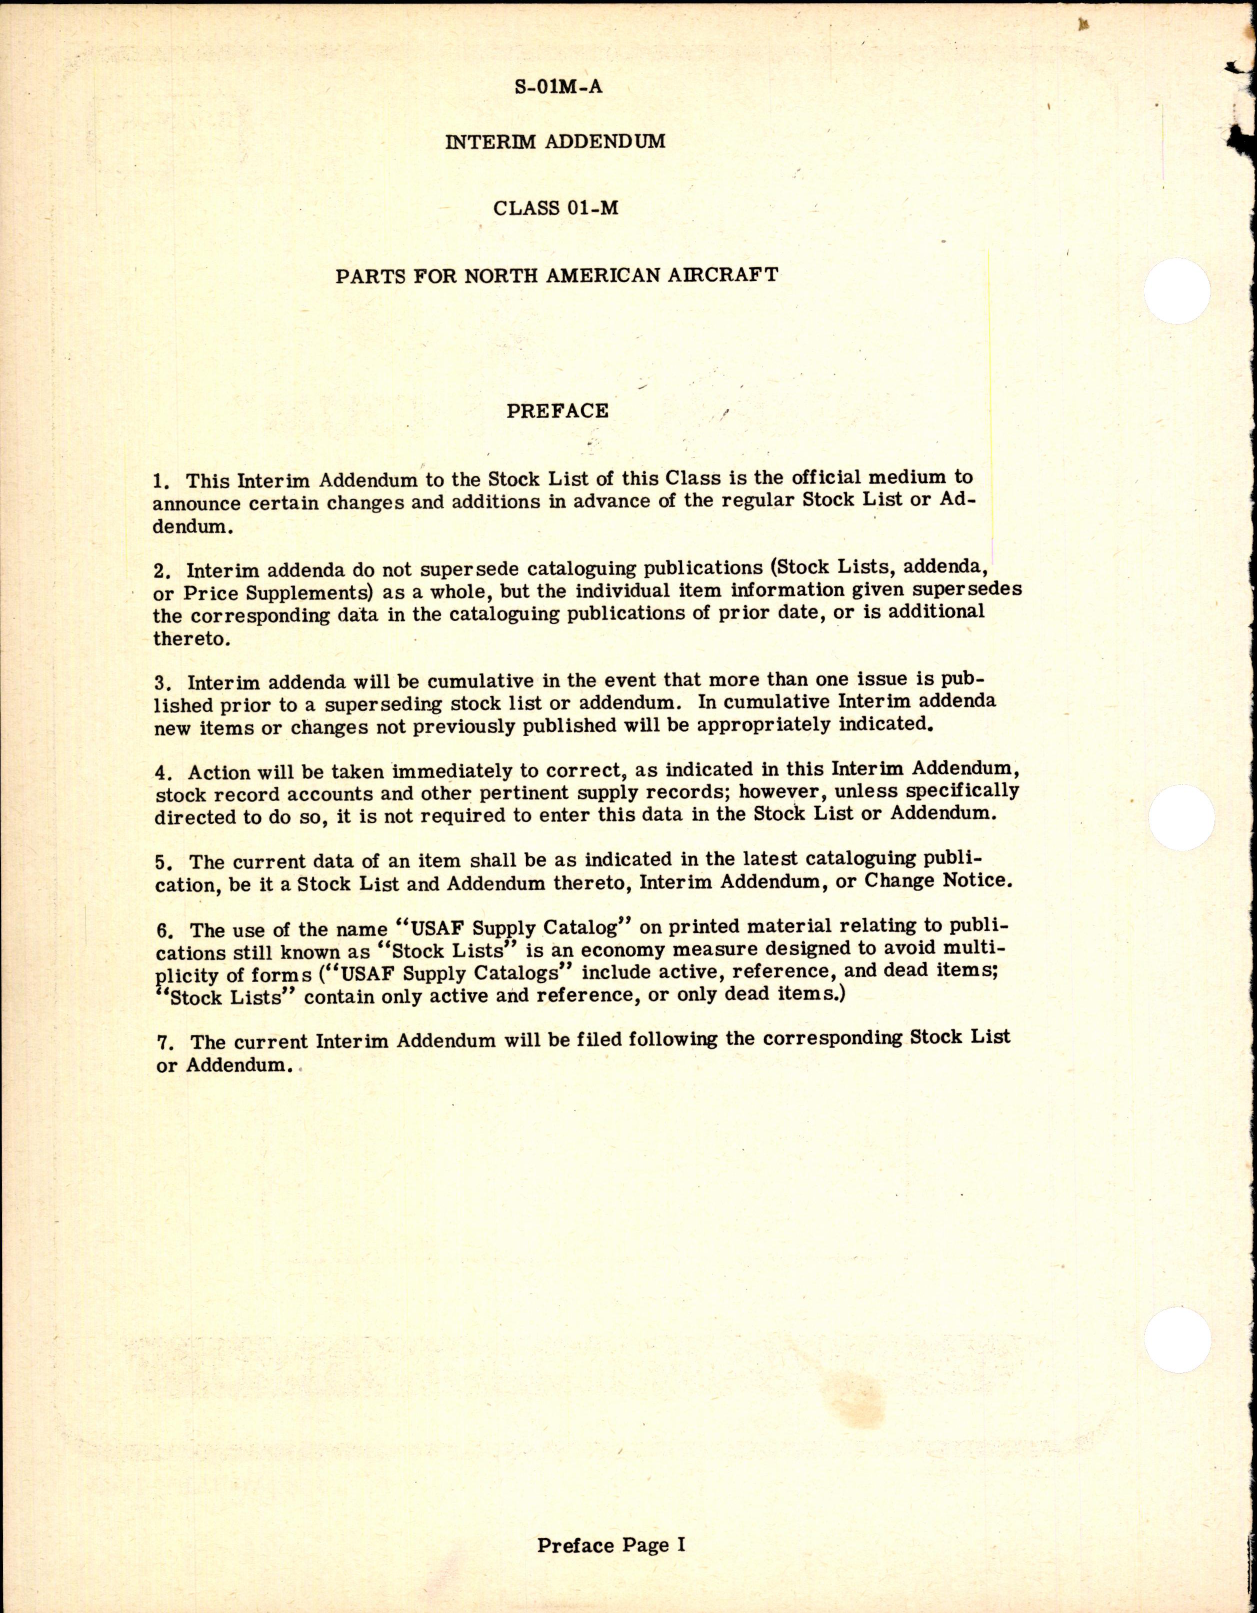 Sample page 2 from AirCorps Library document: Interim Addendum Parts for North American Aircraft